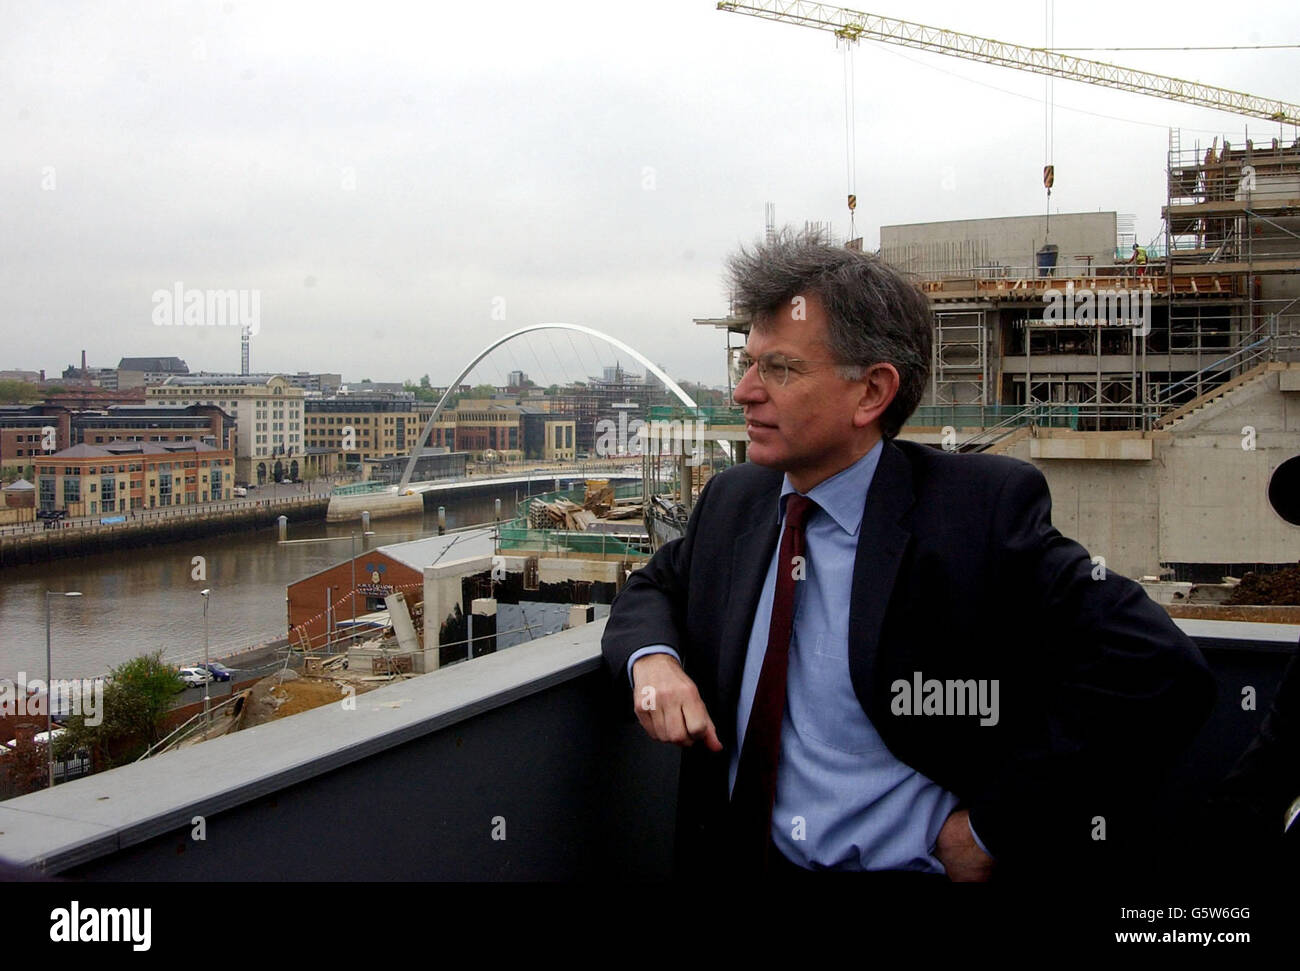 Transport Secretary Stephen Byers looks out across Newcastle while visiting regeneration projects on Tyneside to promote regional government. The under fire Transport minister remained defiant in the face of calls urging him to resign. *...Mr. Byers stressed he wanted to deal with the issues that matter and had nothing to add to the debate on whether he should stand down over the controversy of how the transport spokesman Martin Sixsmith came to leave his post. Stock Photo